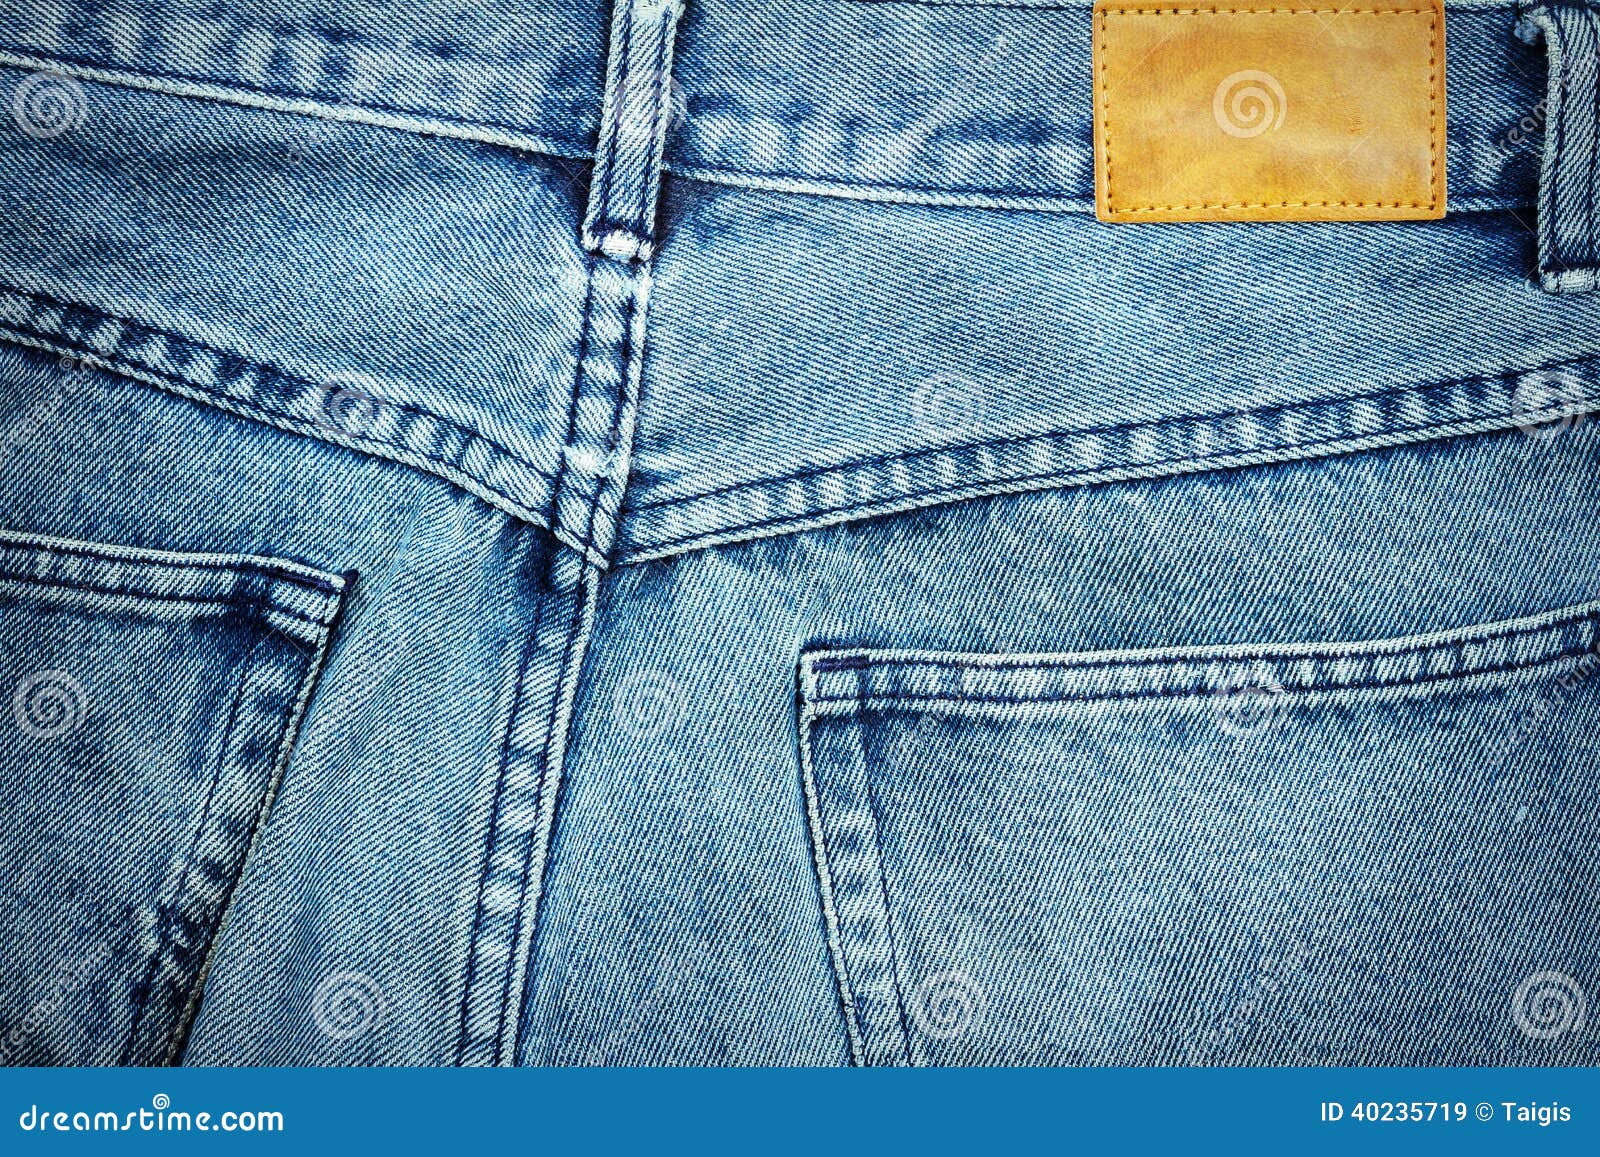 Label Sewed on a Blue Jeans Stock Image - Image of leather, backdrop ...